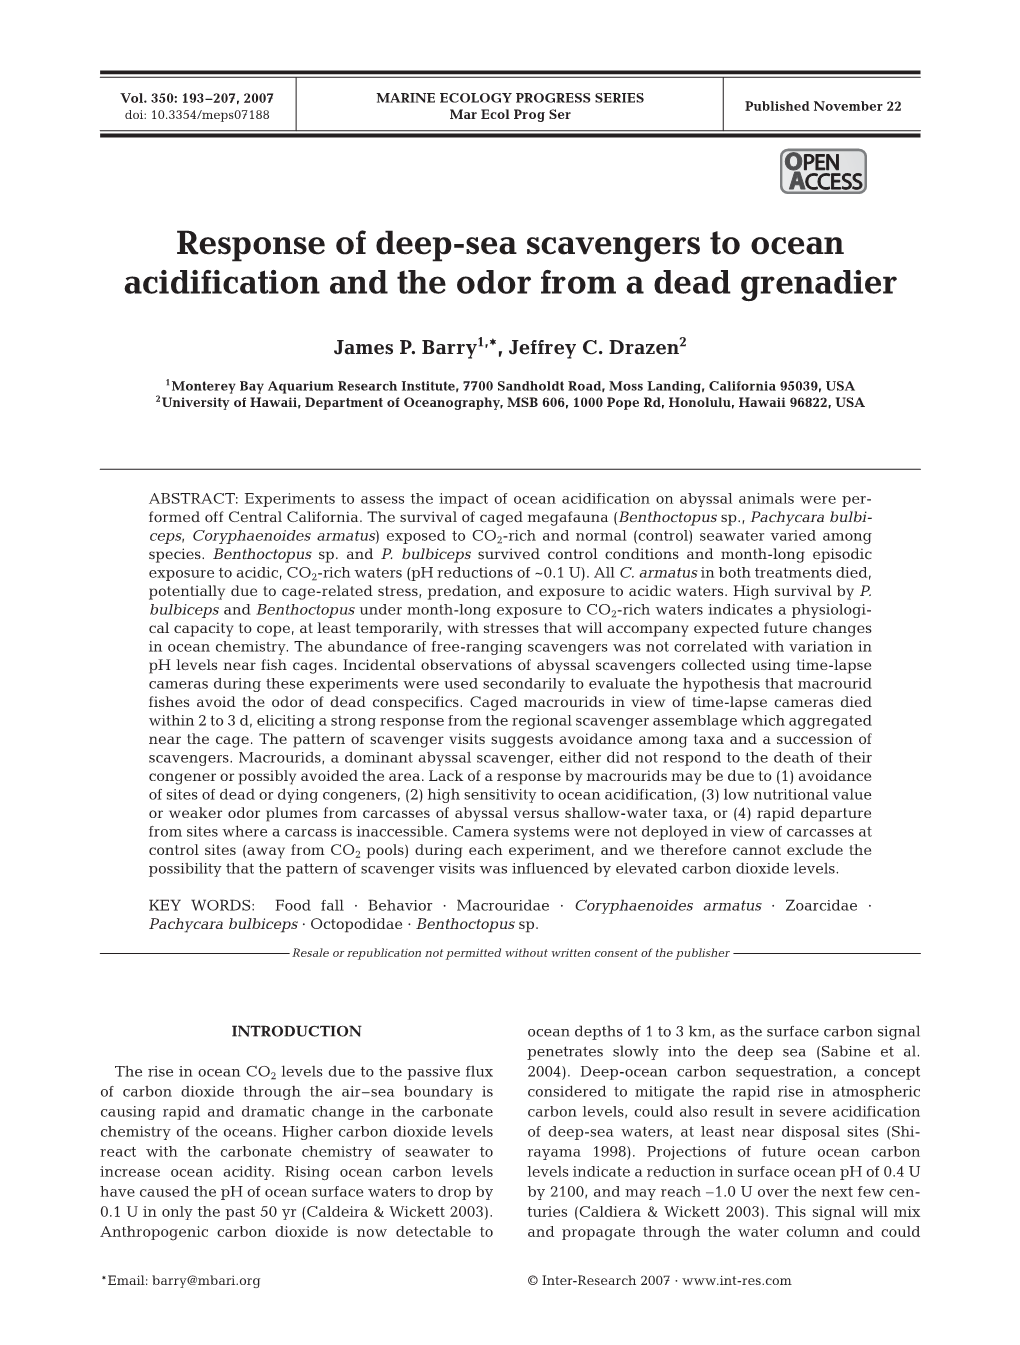 Response of Deep-Sea Scavengers to Ocean Acidification and the Odor from a Dead Grenadier